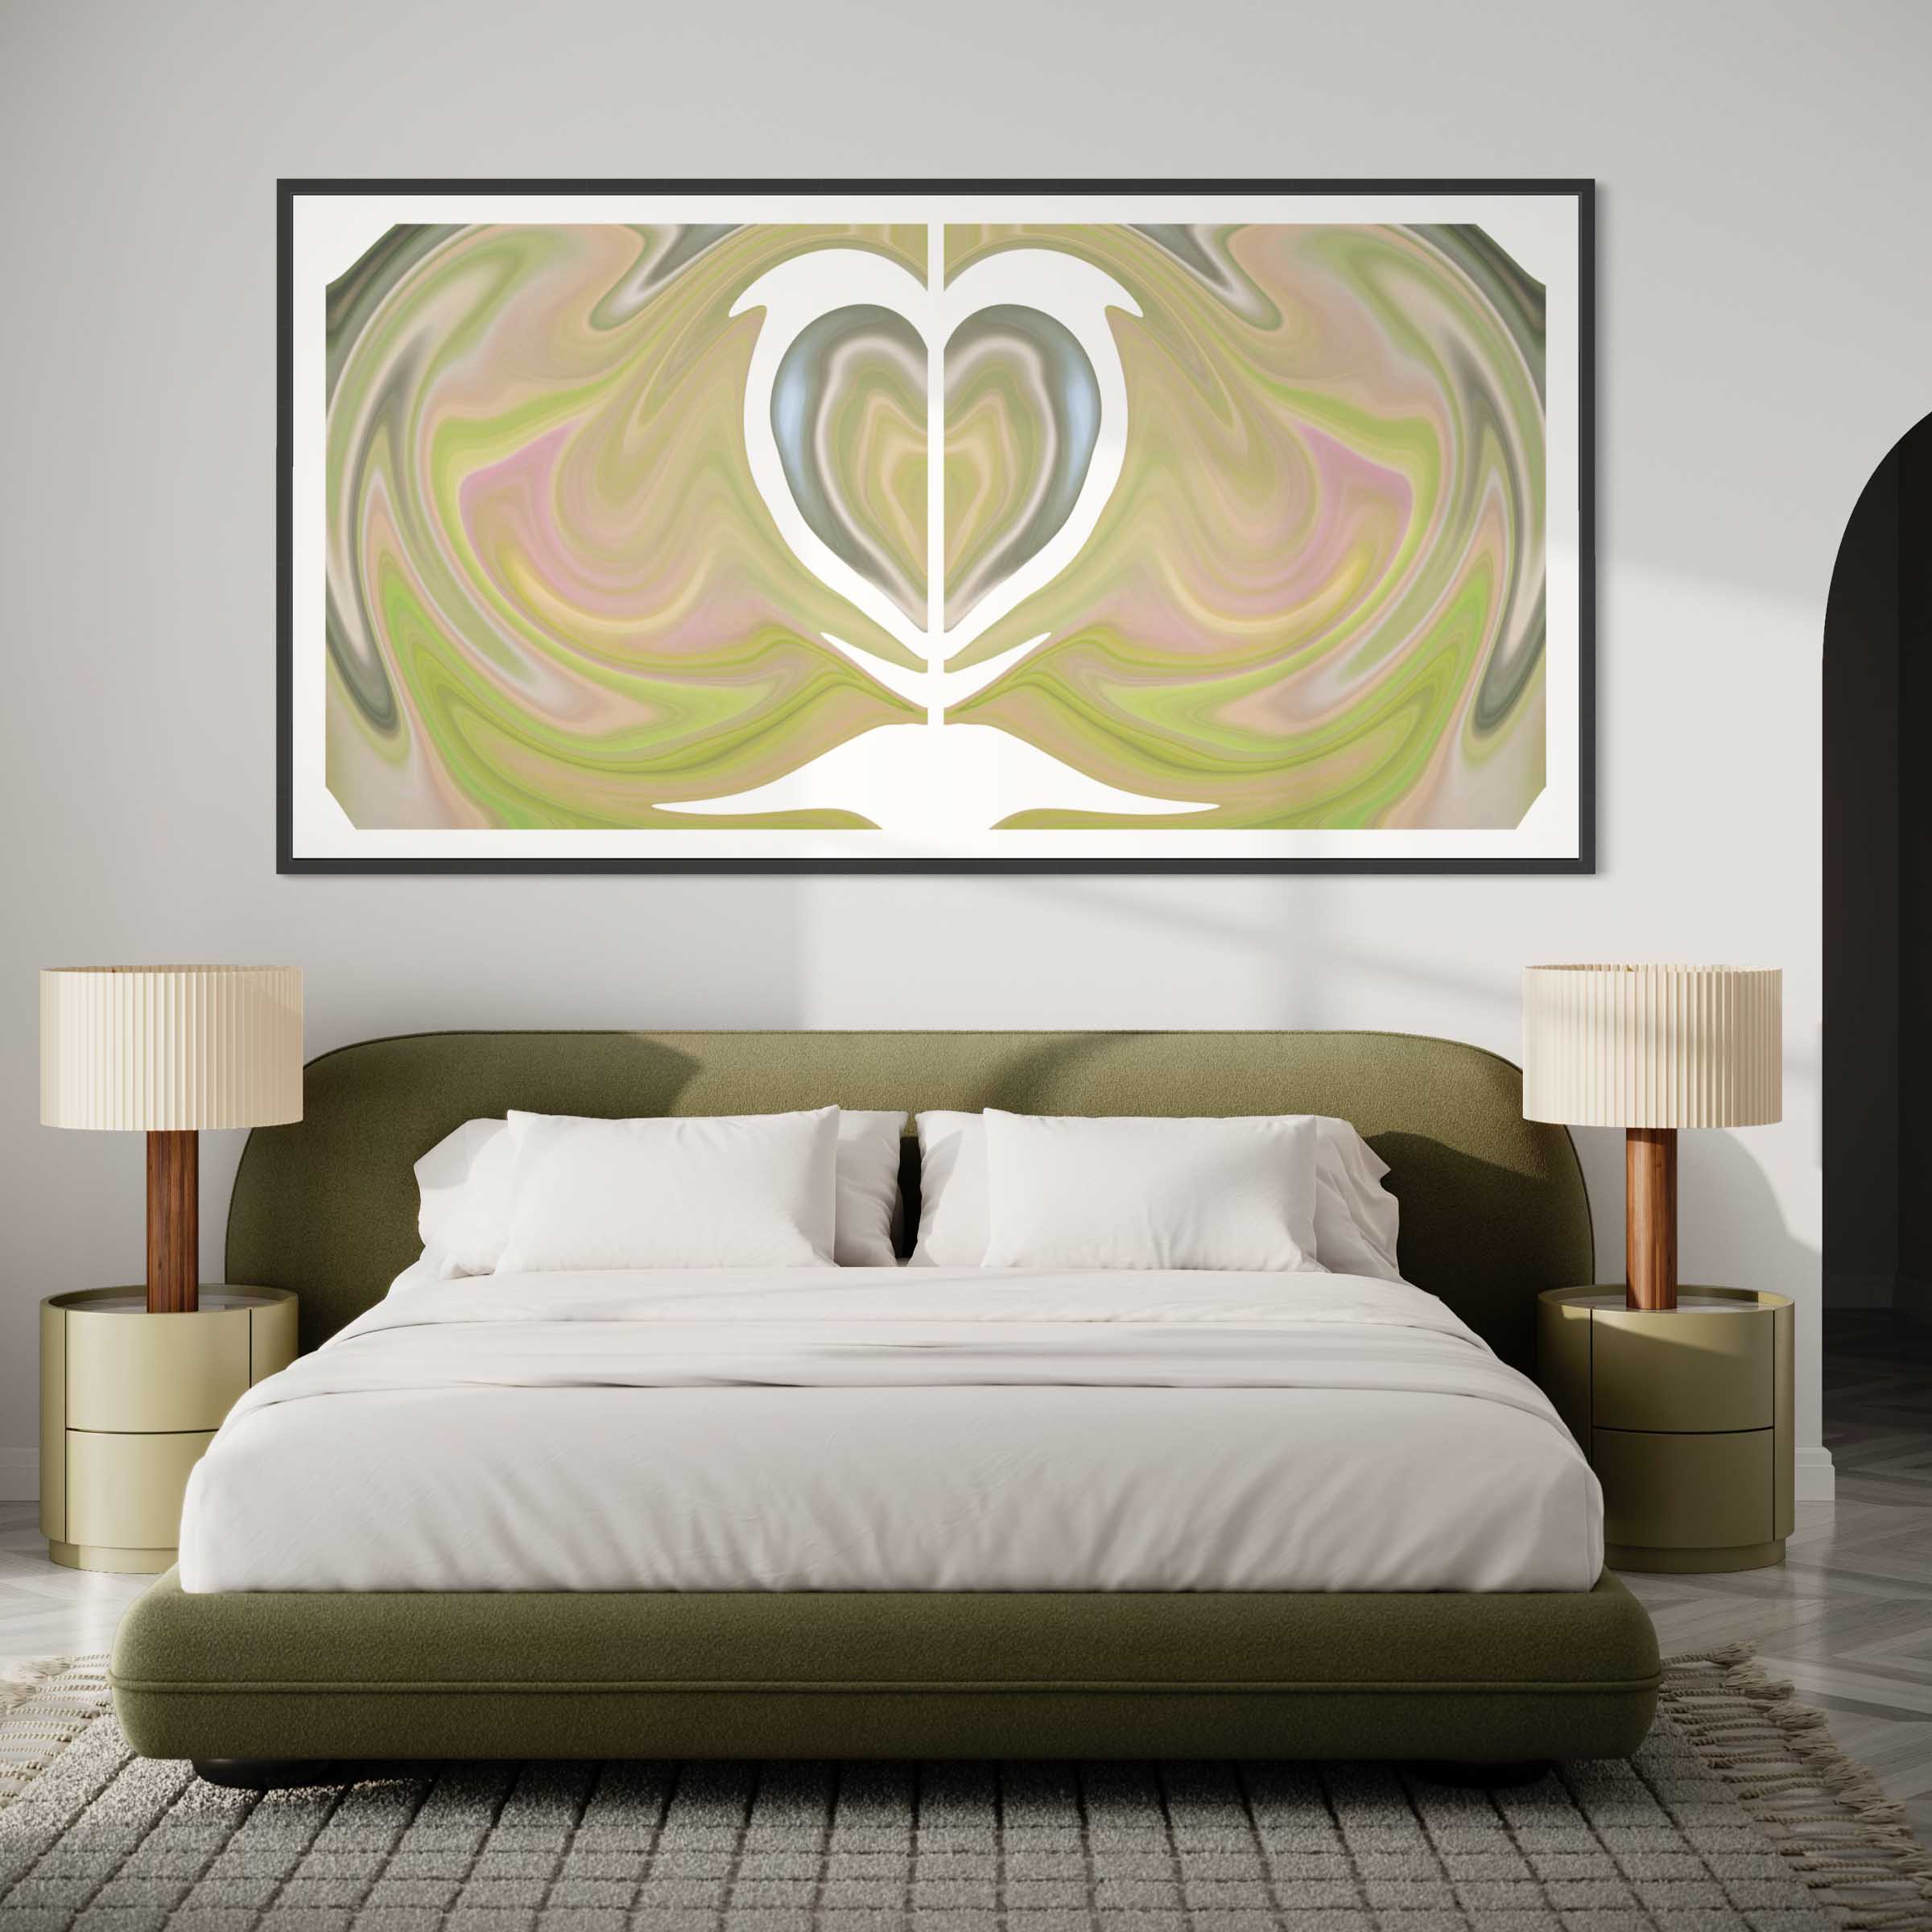 A large painting of a heart in the middle of a bedroom.